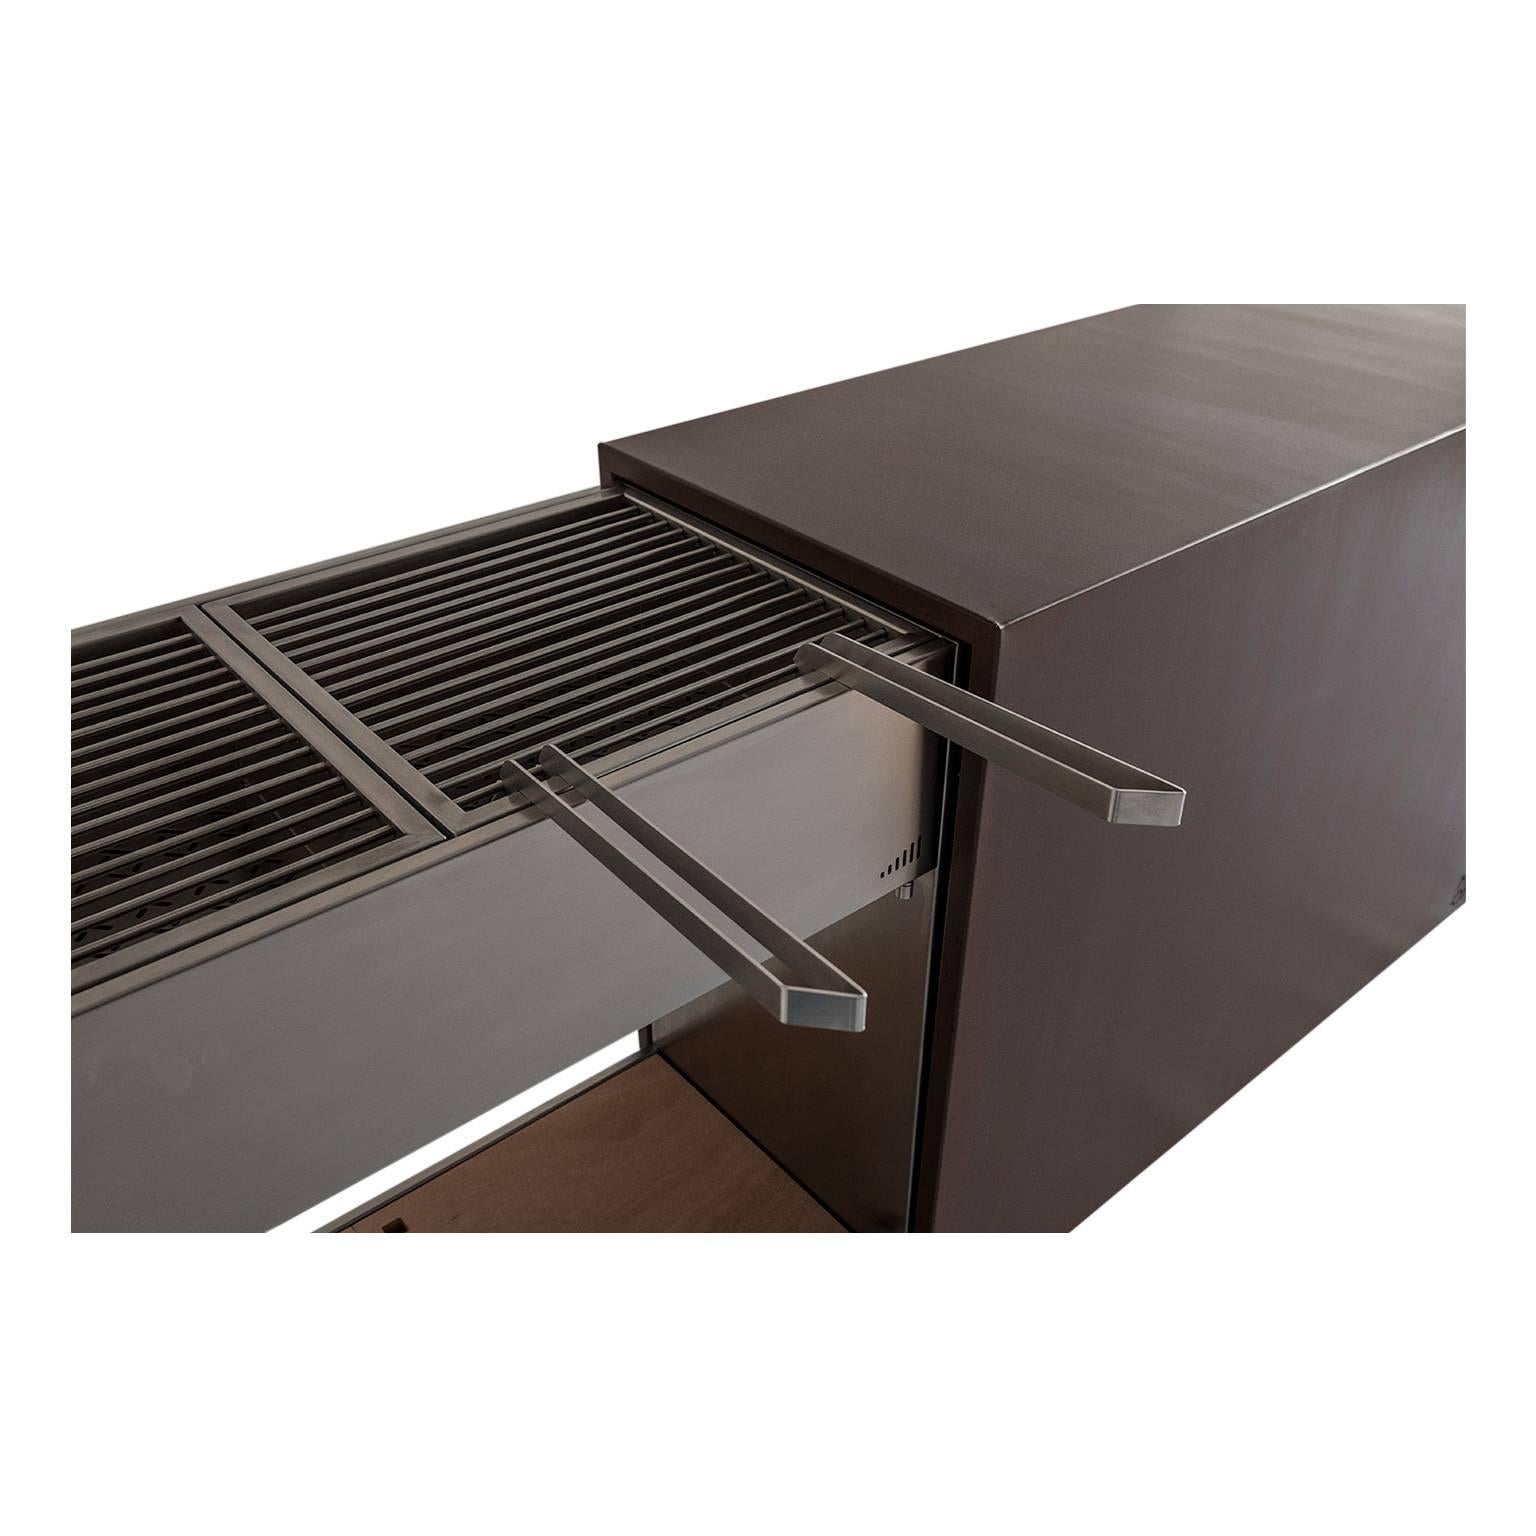 Elegant Corten Outdoor Charcoal Barbecue with Shelves and Cupboards, Snail im Zustand „Neu“ im Angebot in Palermo, IT